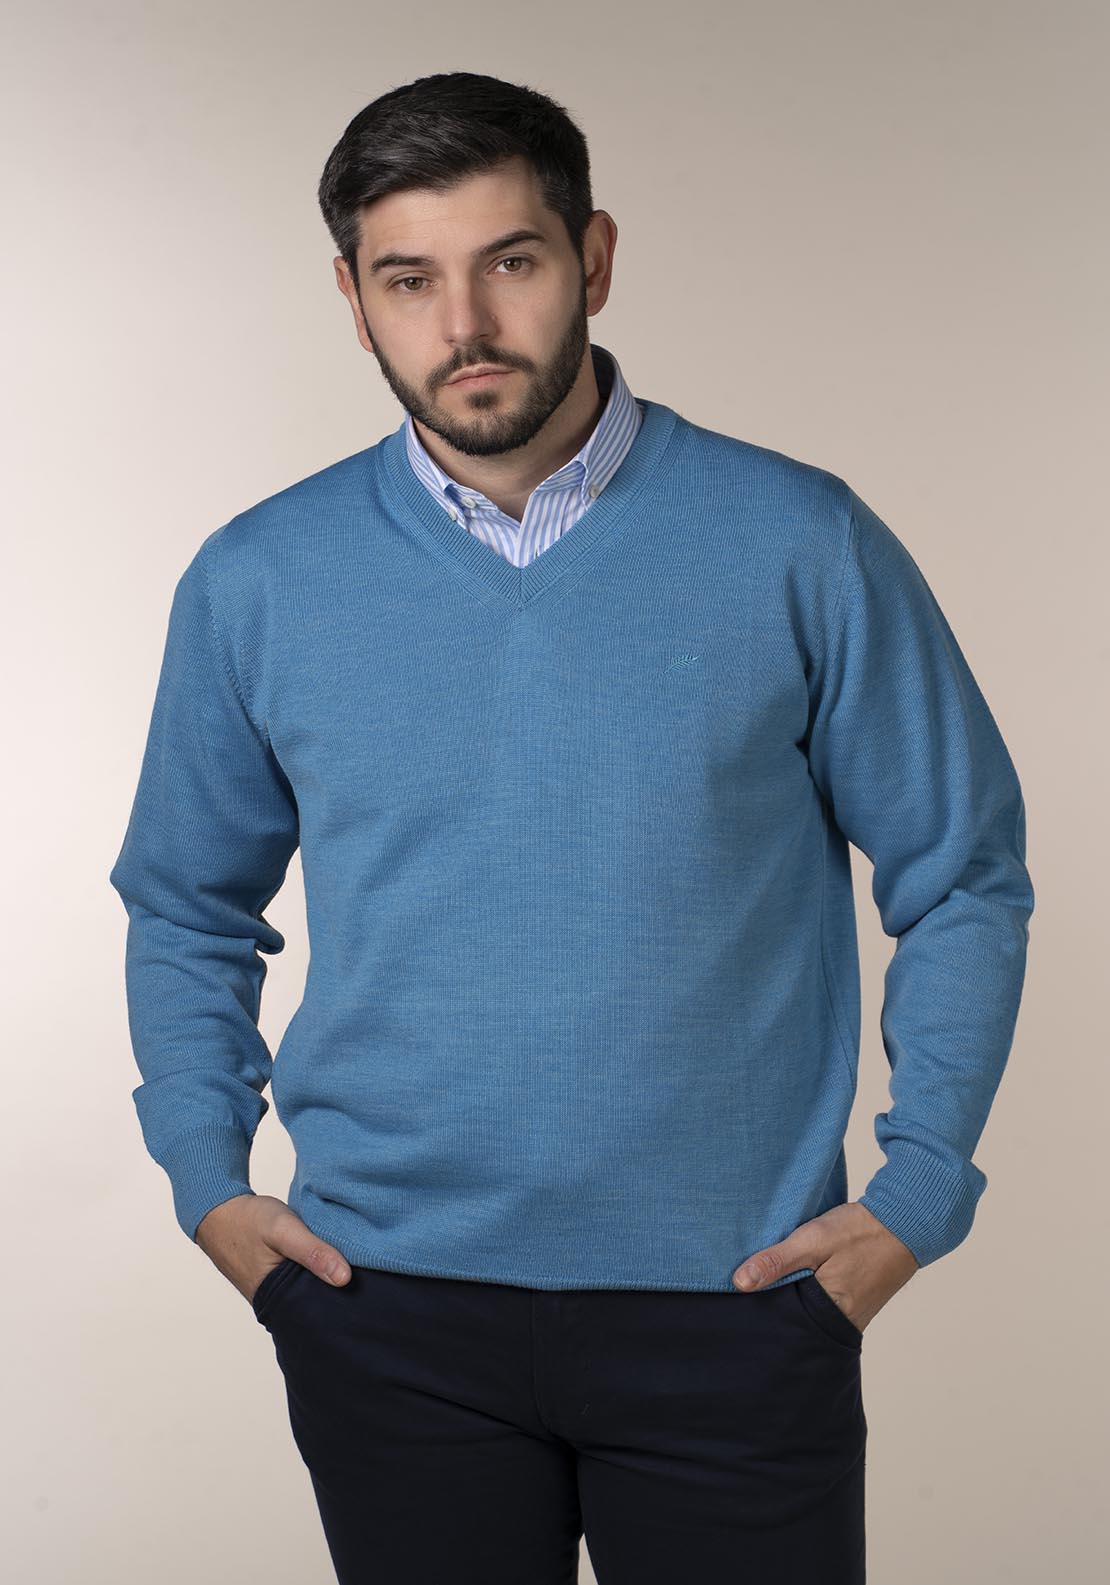 Yeats Mens 100% Cotton V-Neck Jumper 1 Shaws Department Stores